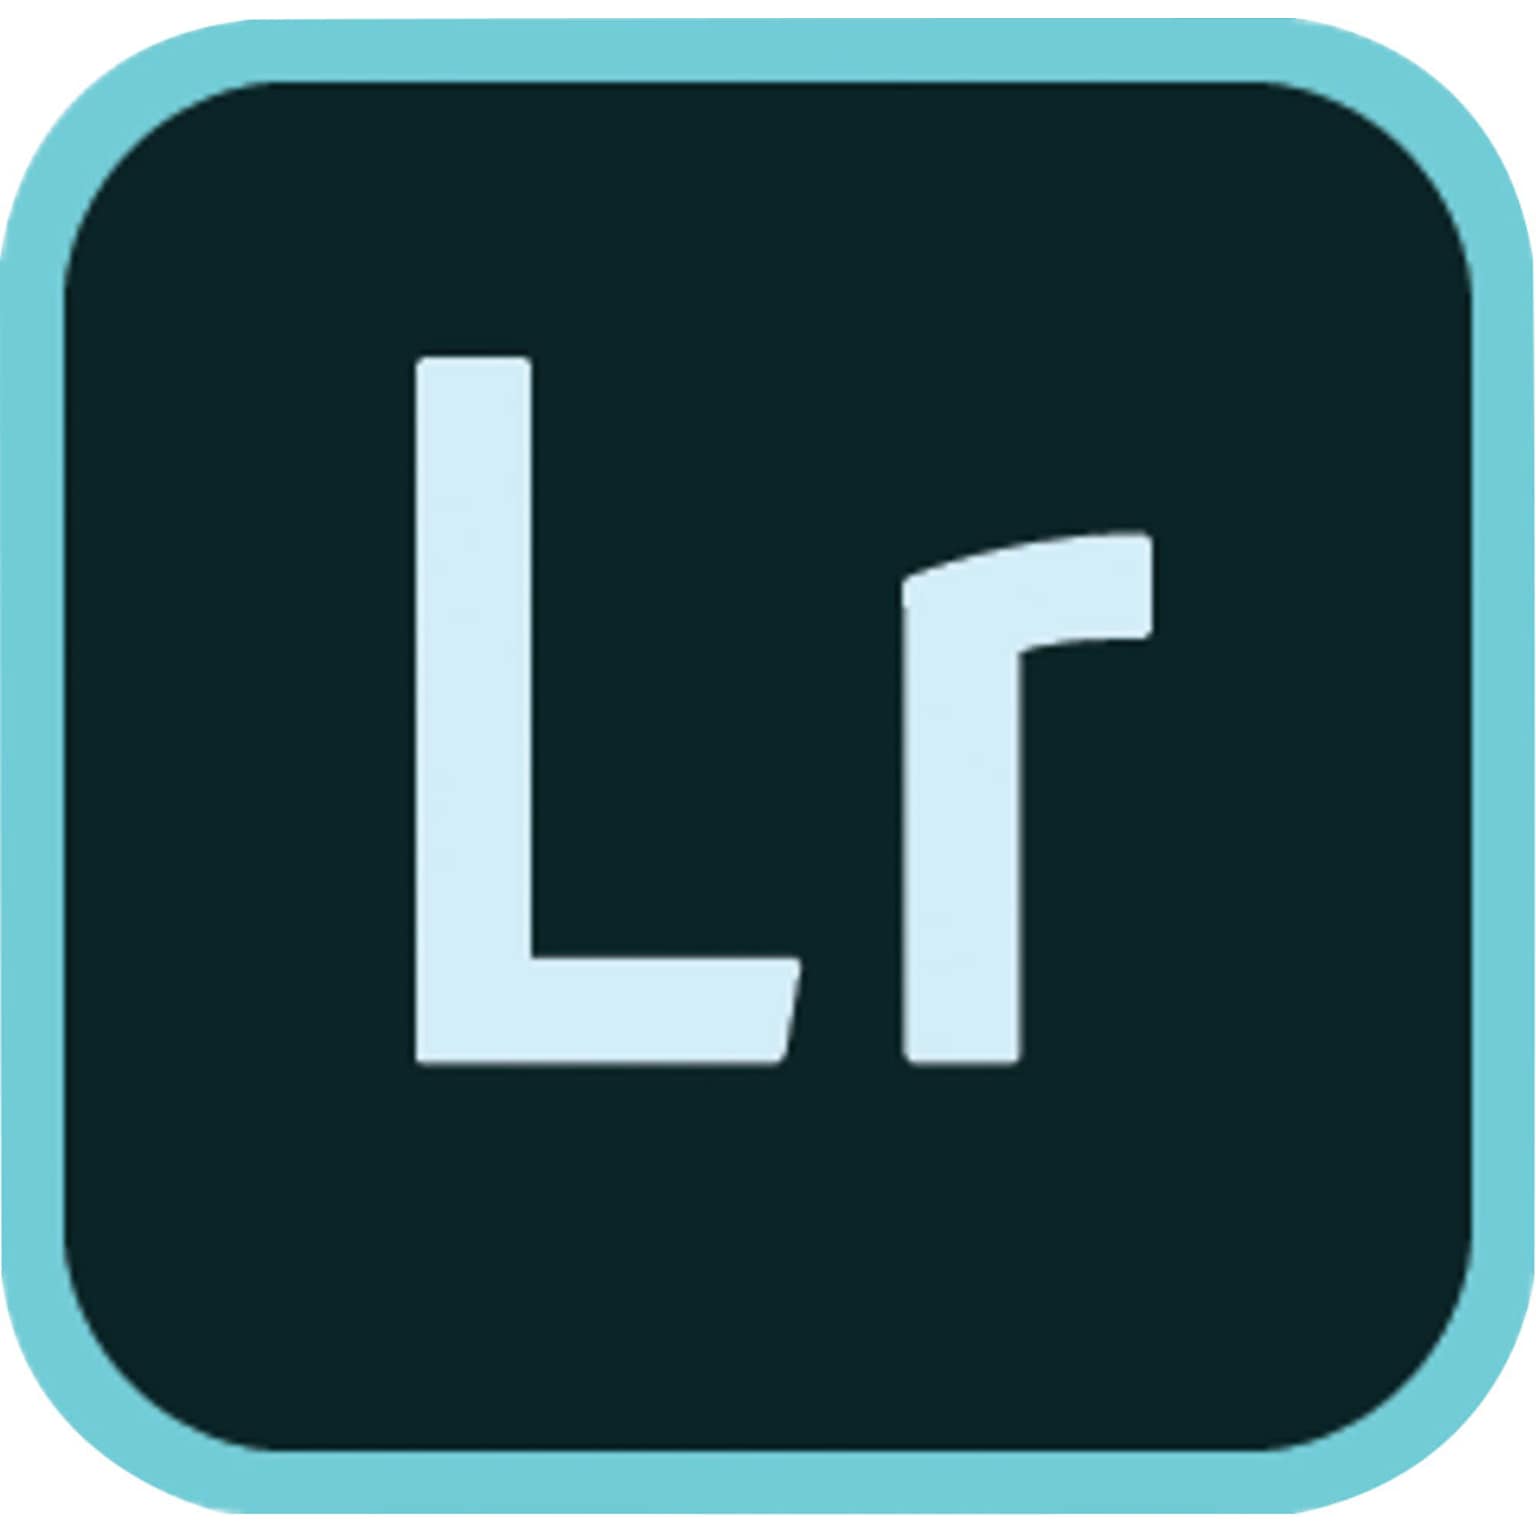 Adobe Lightroom CC 1 Year Subscription for Windows/Mac (1 User) [Download]